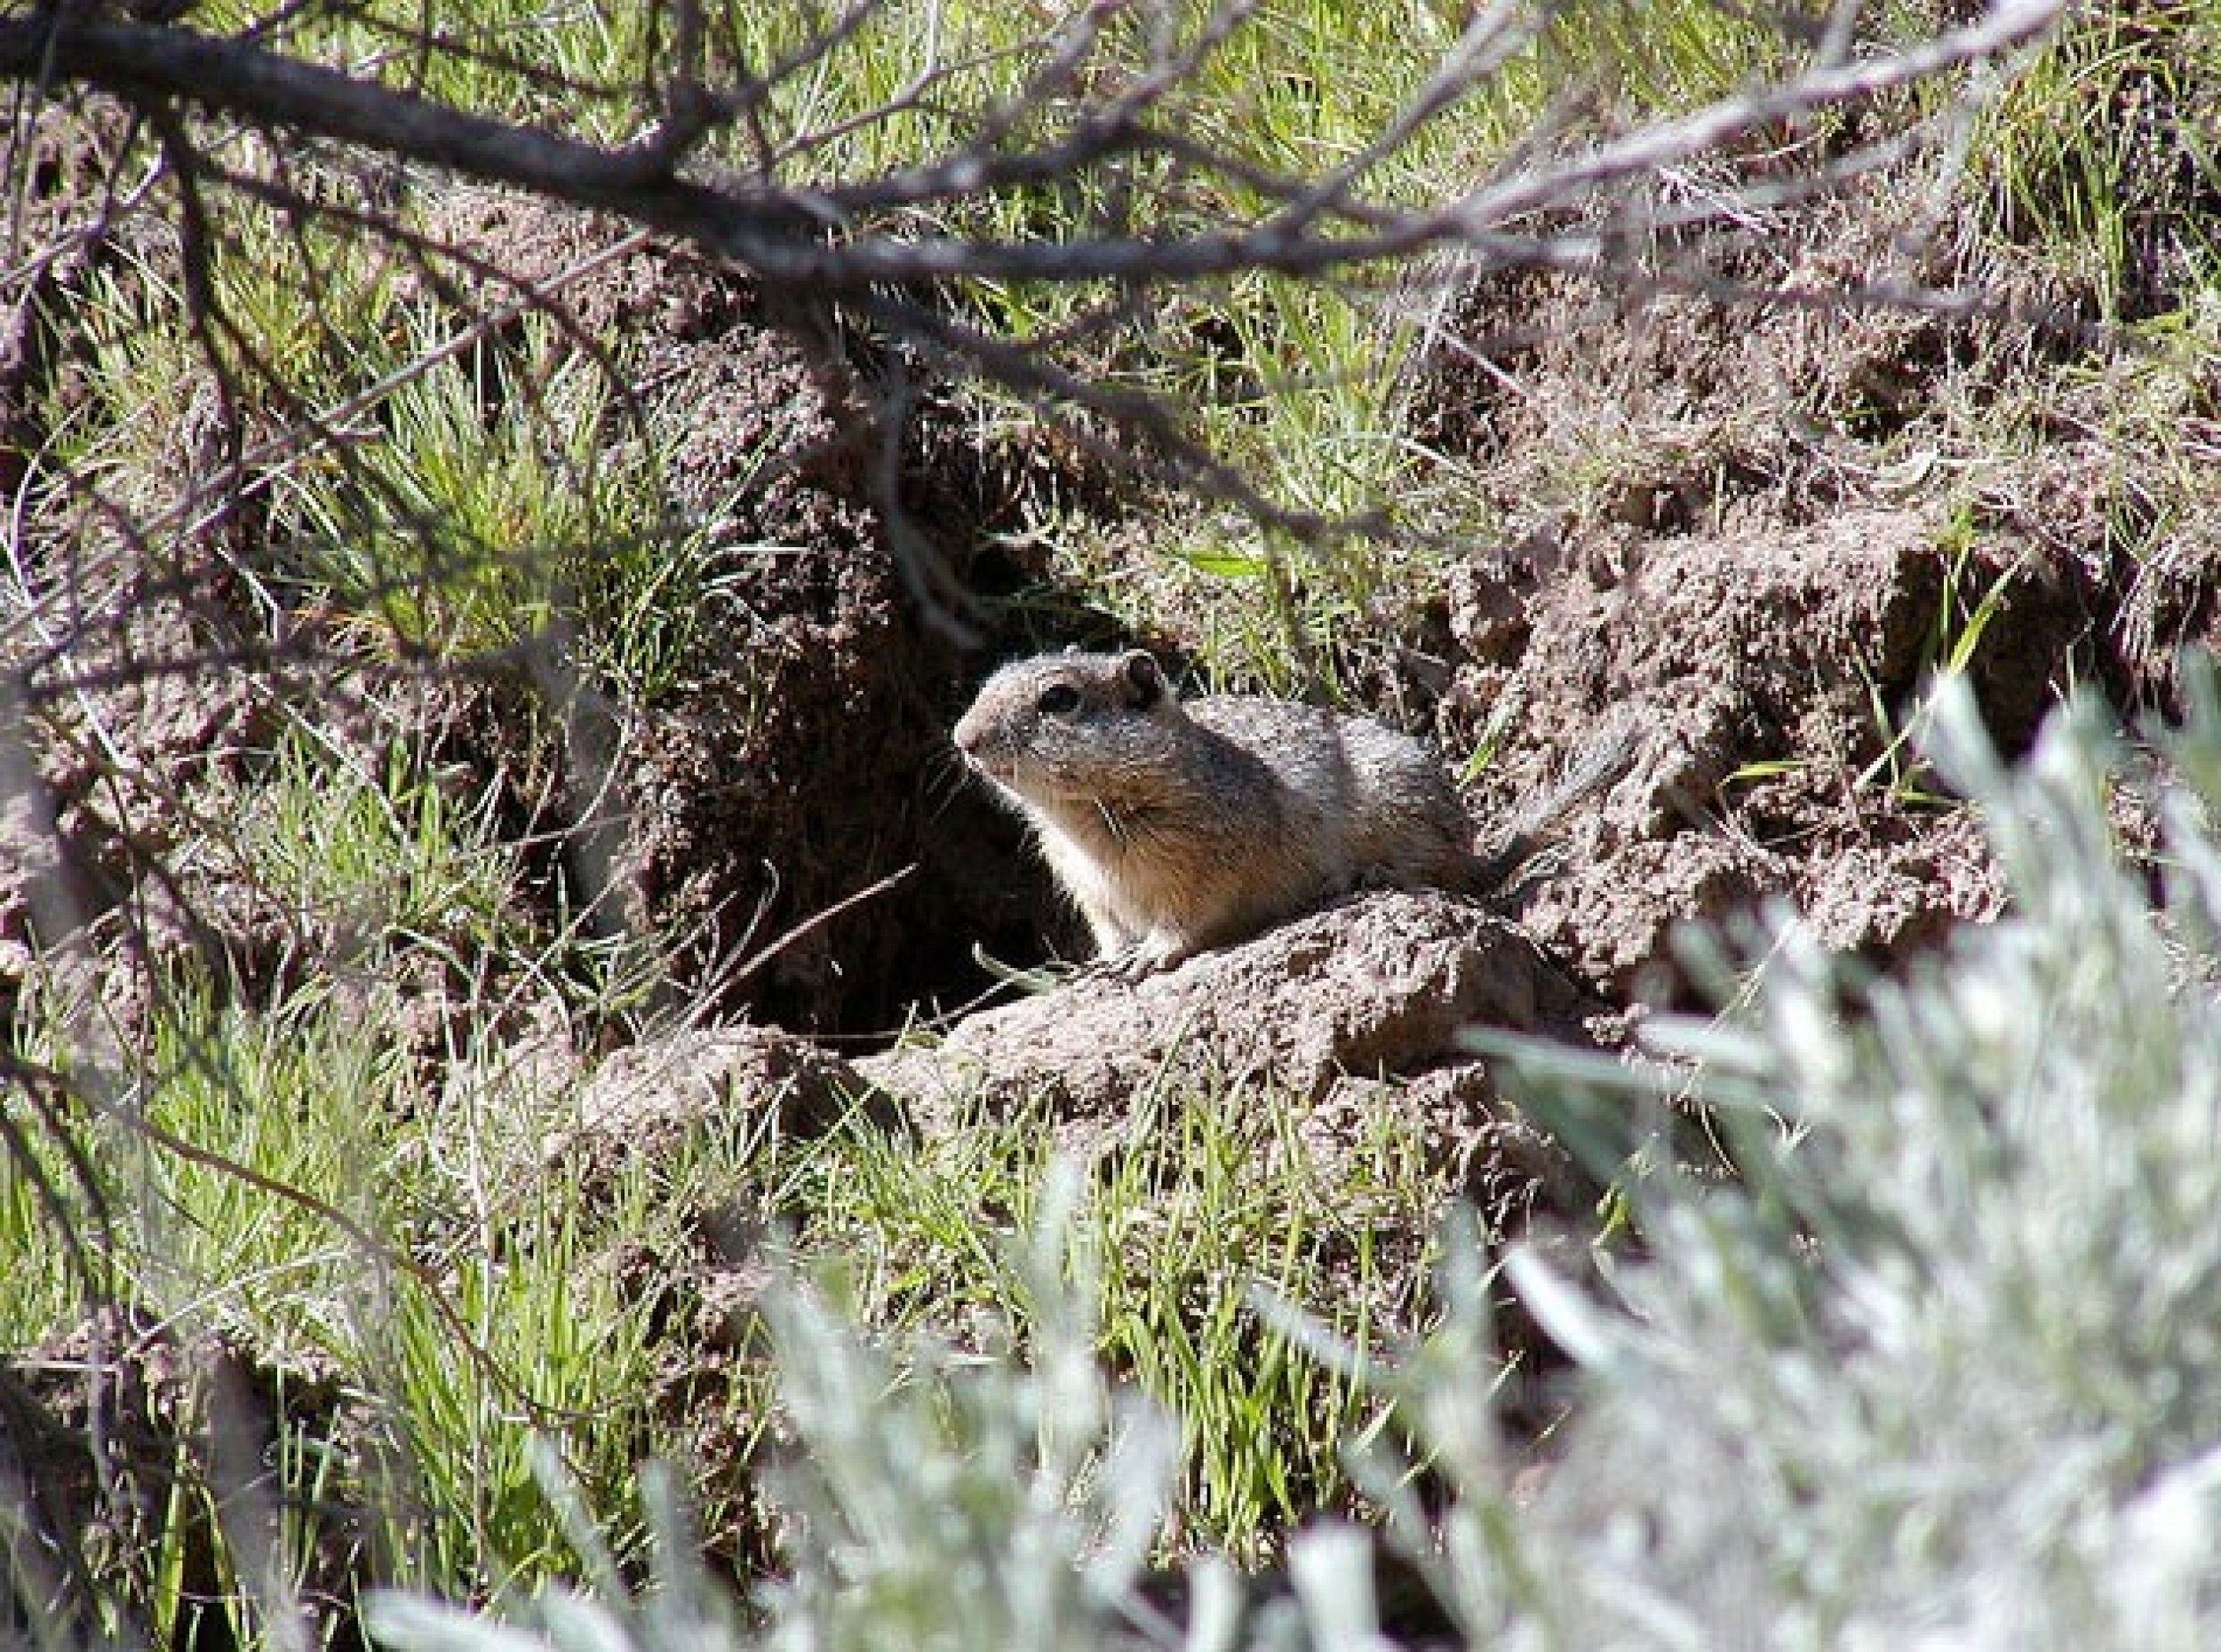 Southern Idaho ground squirrel Spermophilus brunneus endemicus, candidate